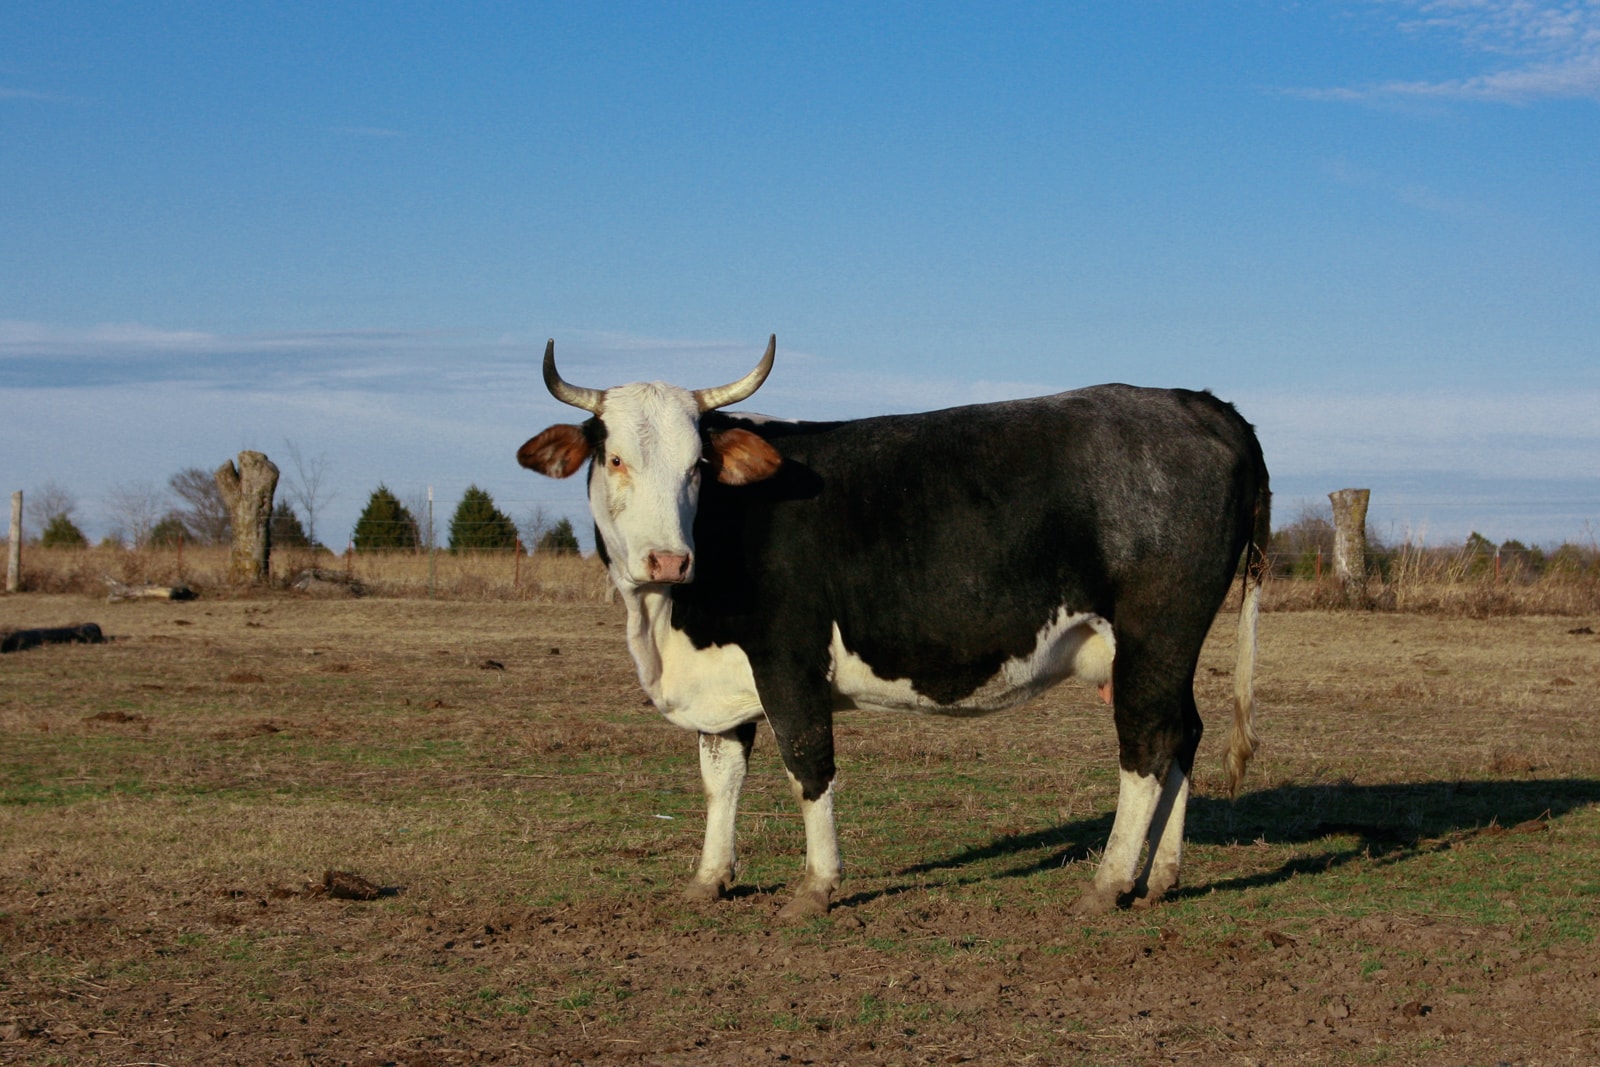 A cow in a pasture